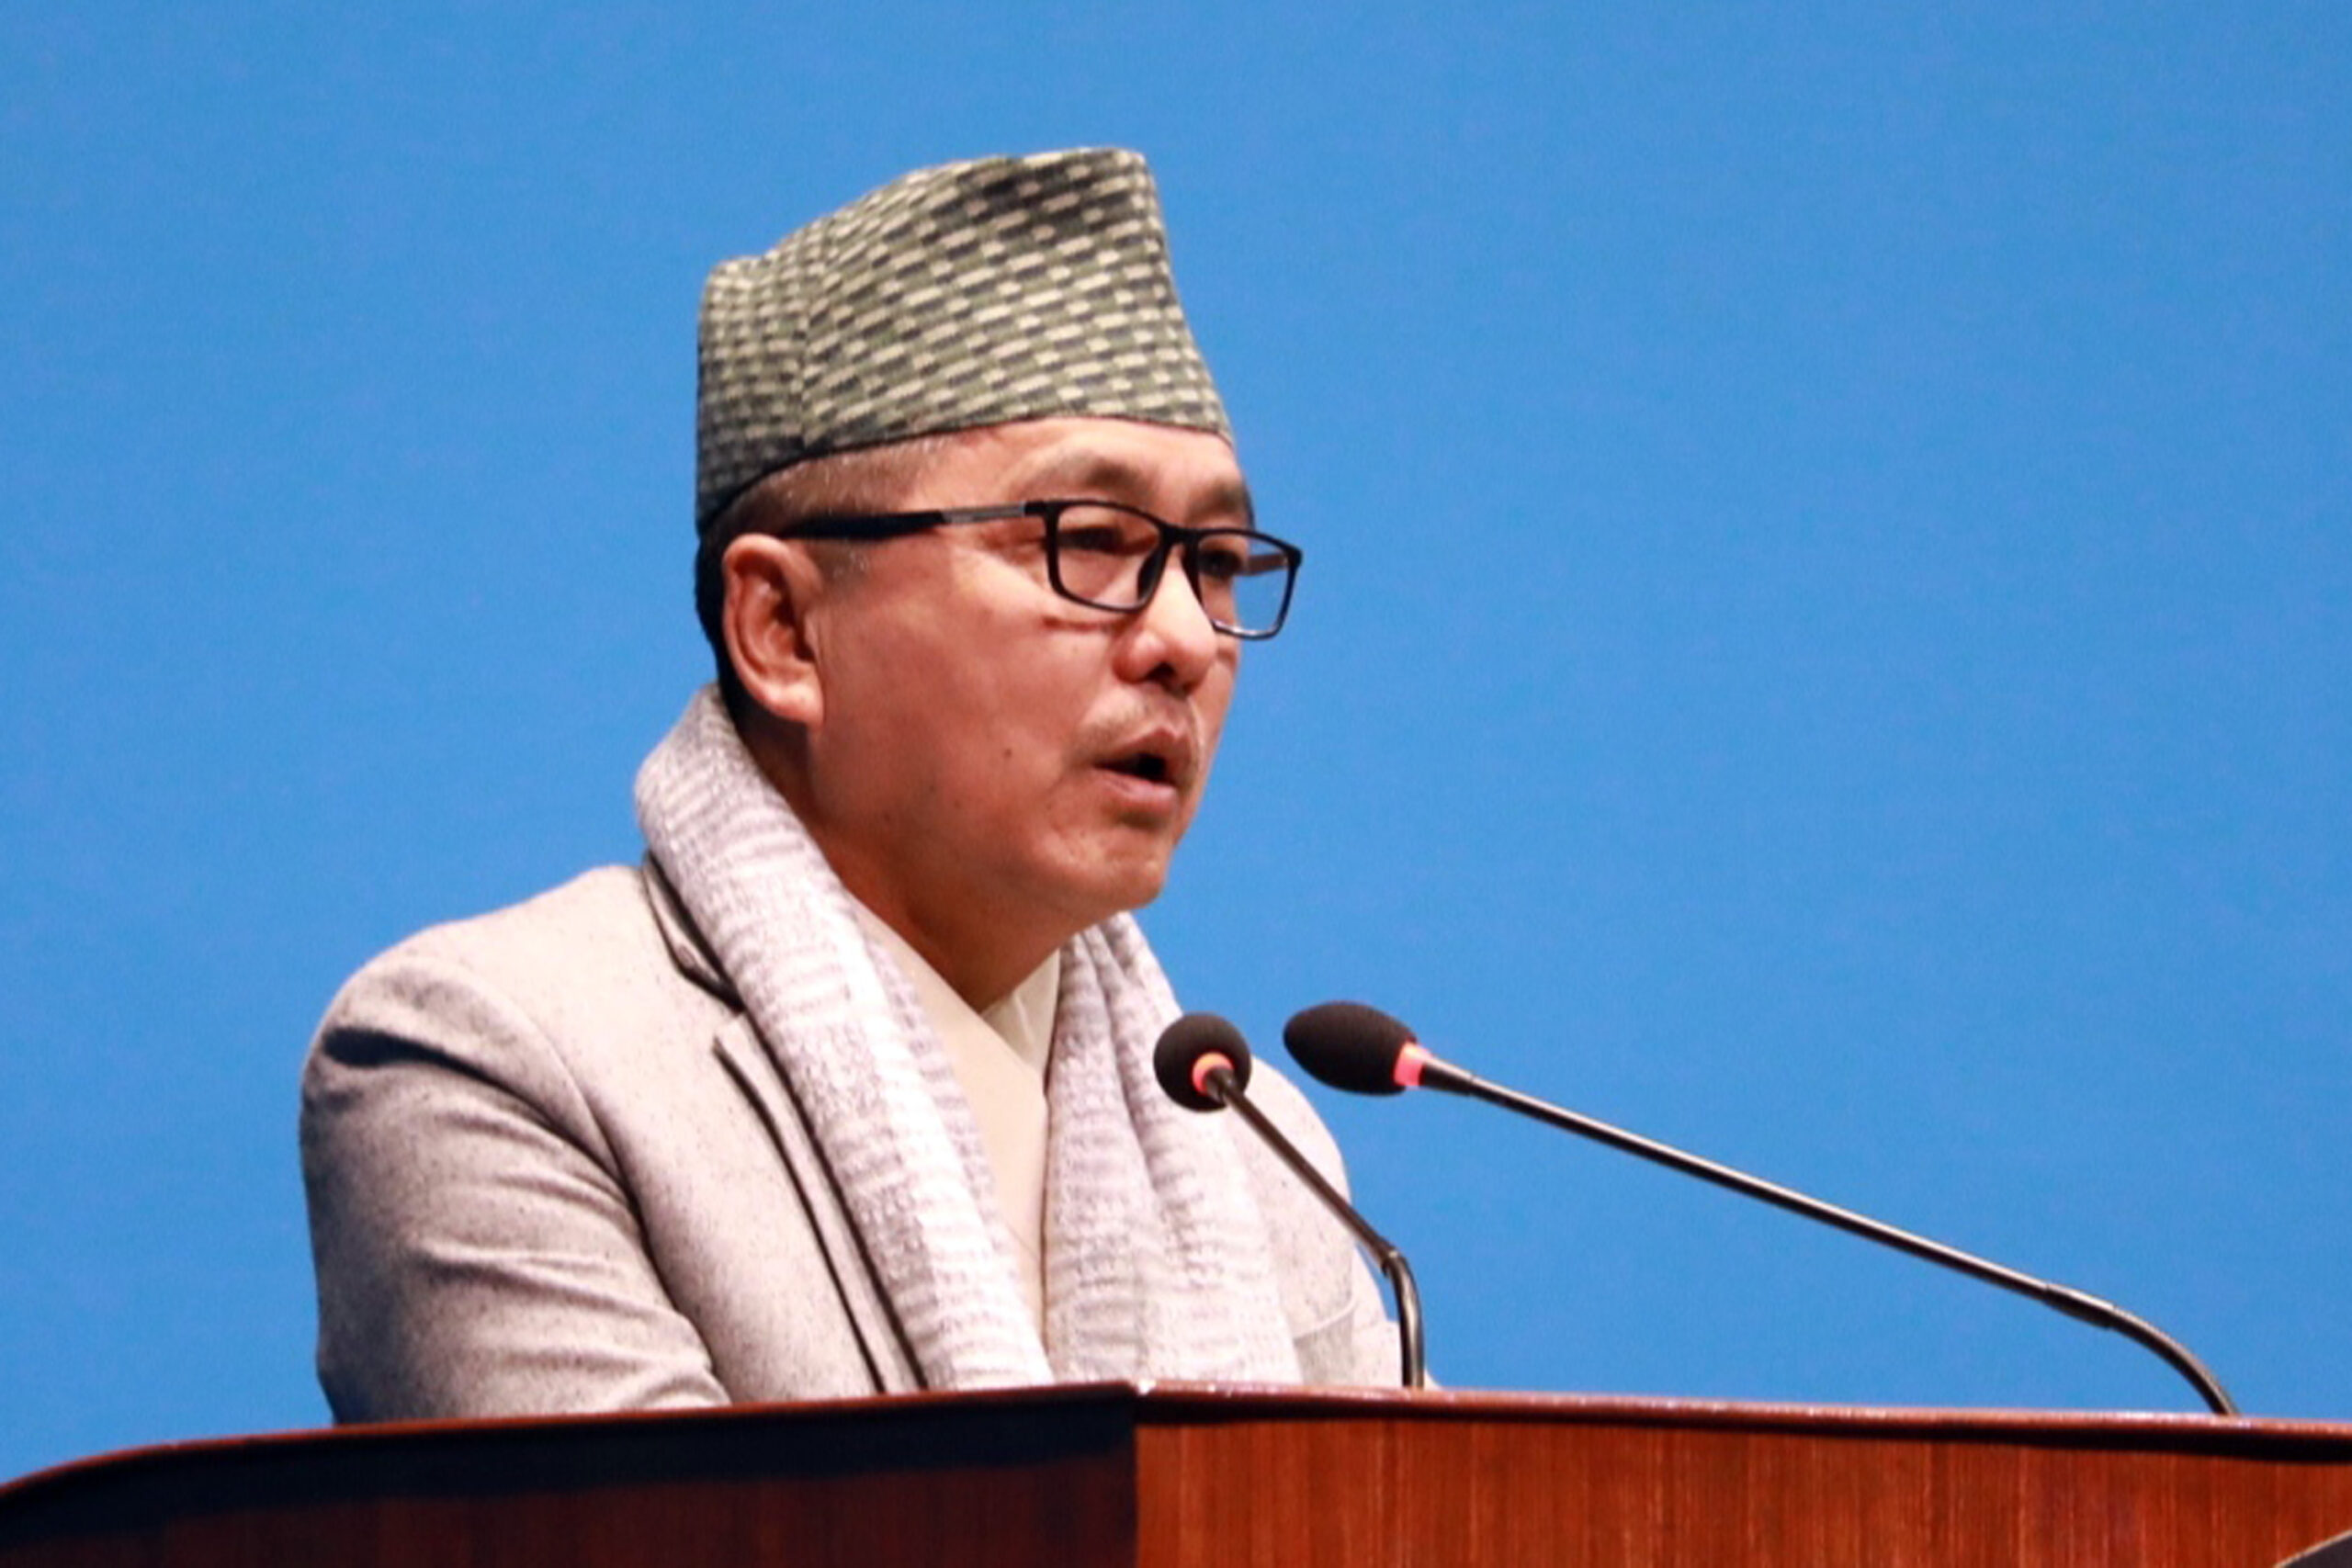 Agenda of Hindu nation will be strengthened: DPM Lingden